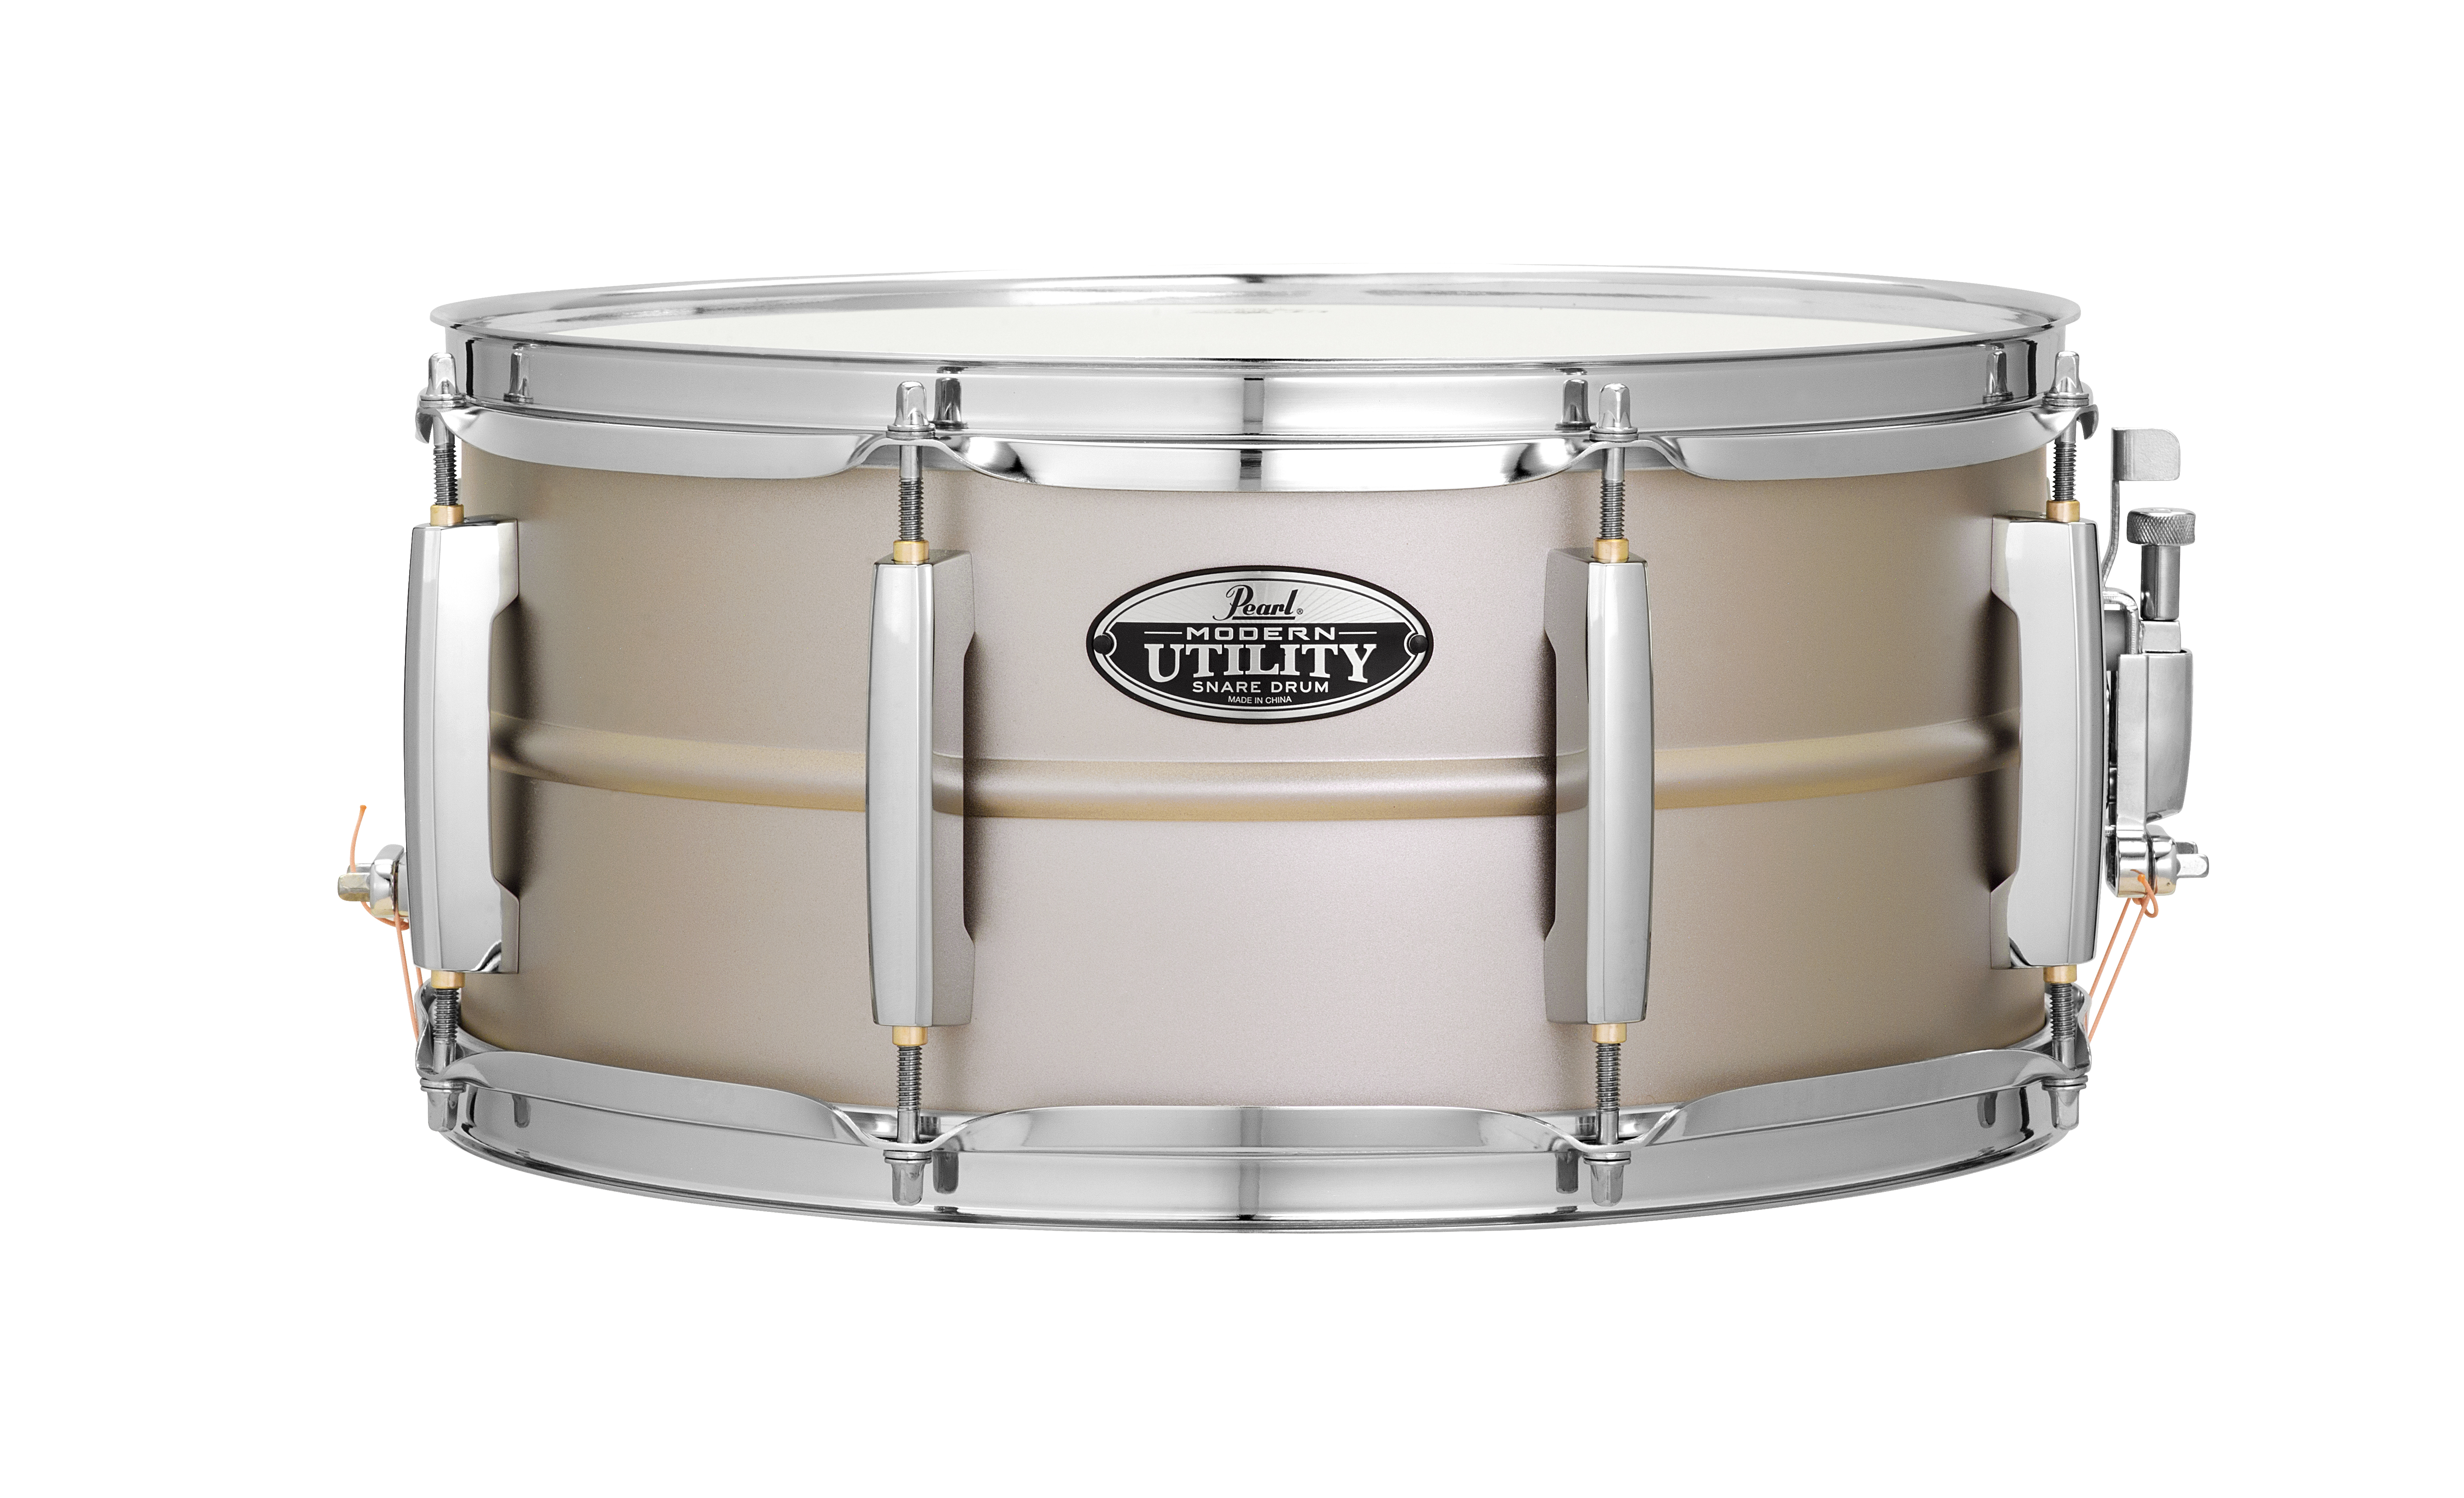 Steel Utility X6.5   Pearl Drums  Official site